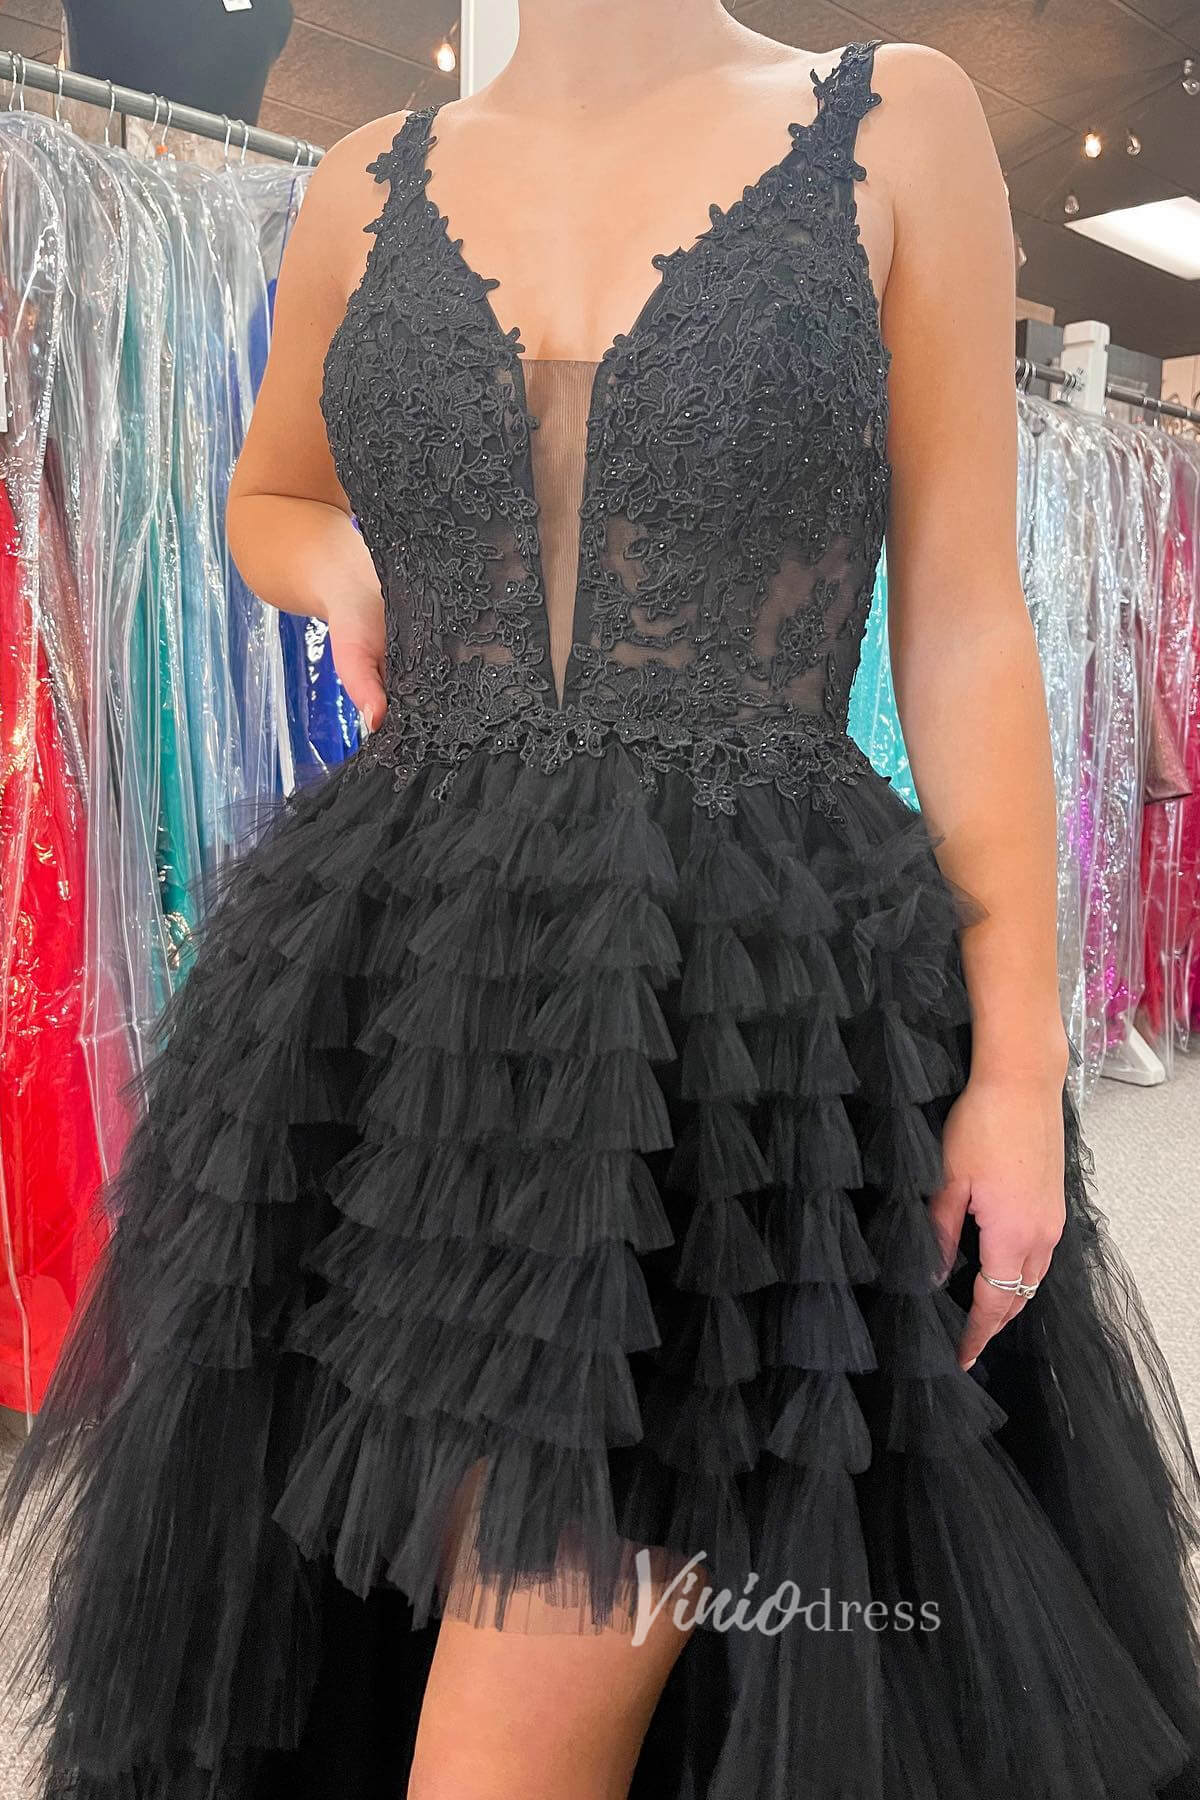 Black High-Low Ruffled Prom Dress with Plunging V-Neck and Lace Applique FD3483-prom dresses-Viniodress-Viniodress